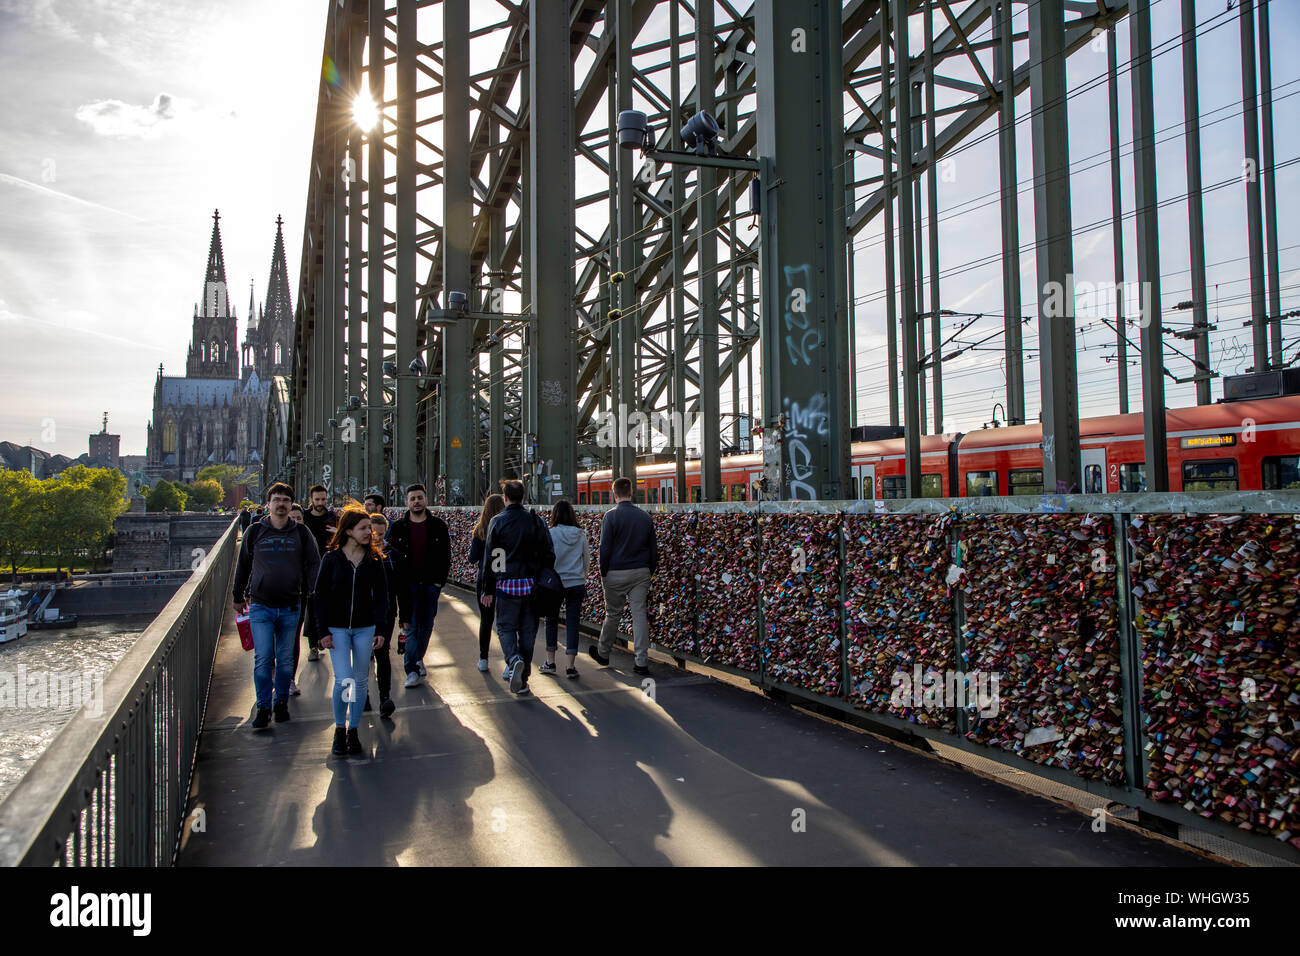 Cologne, Hohenzollern Bridge, pedestrian and railway bridge over the Rhine, Cologne Cathedral, Germany Stock Photo